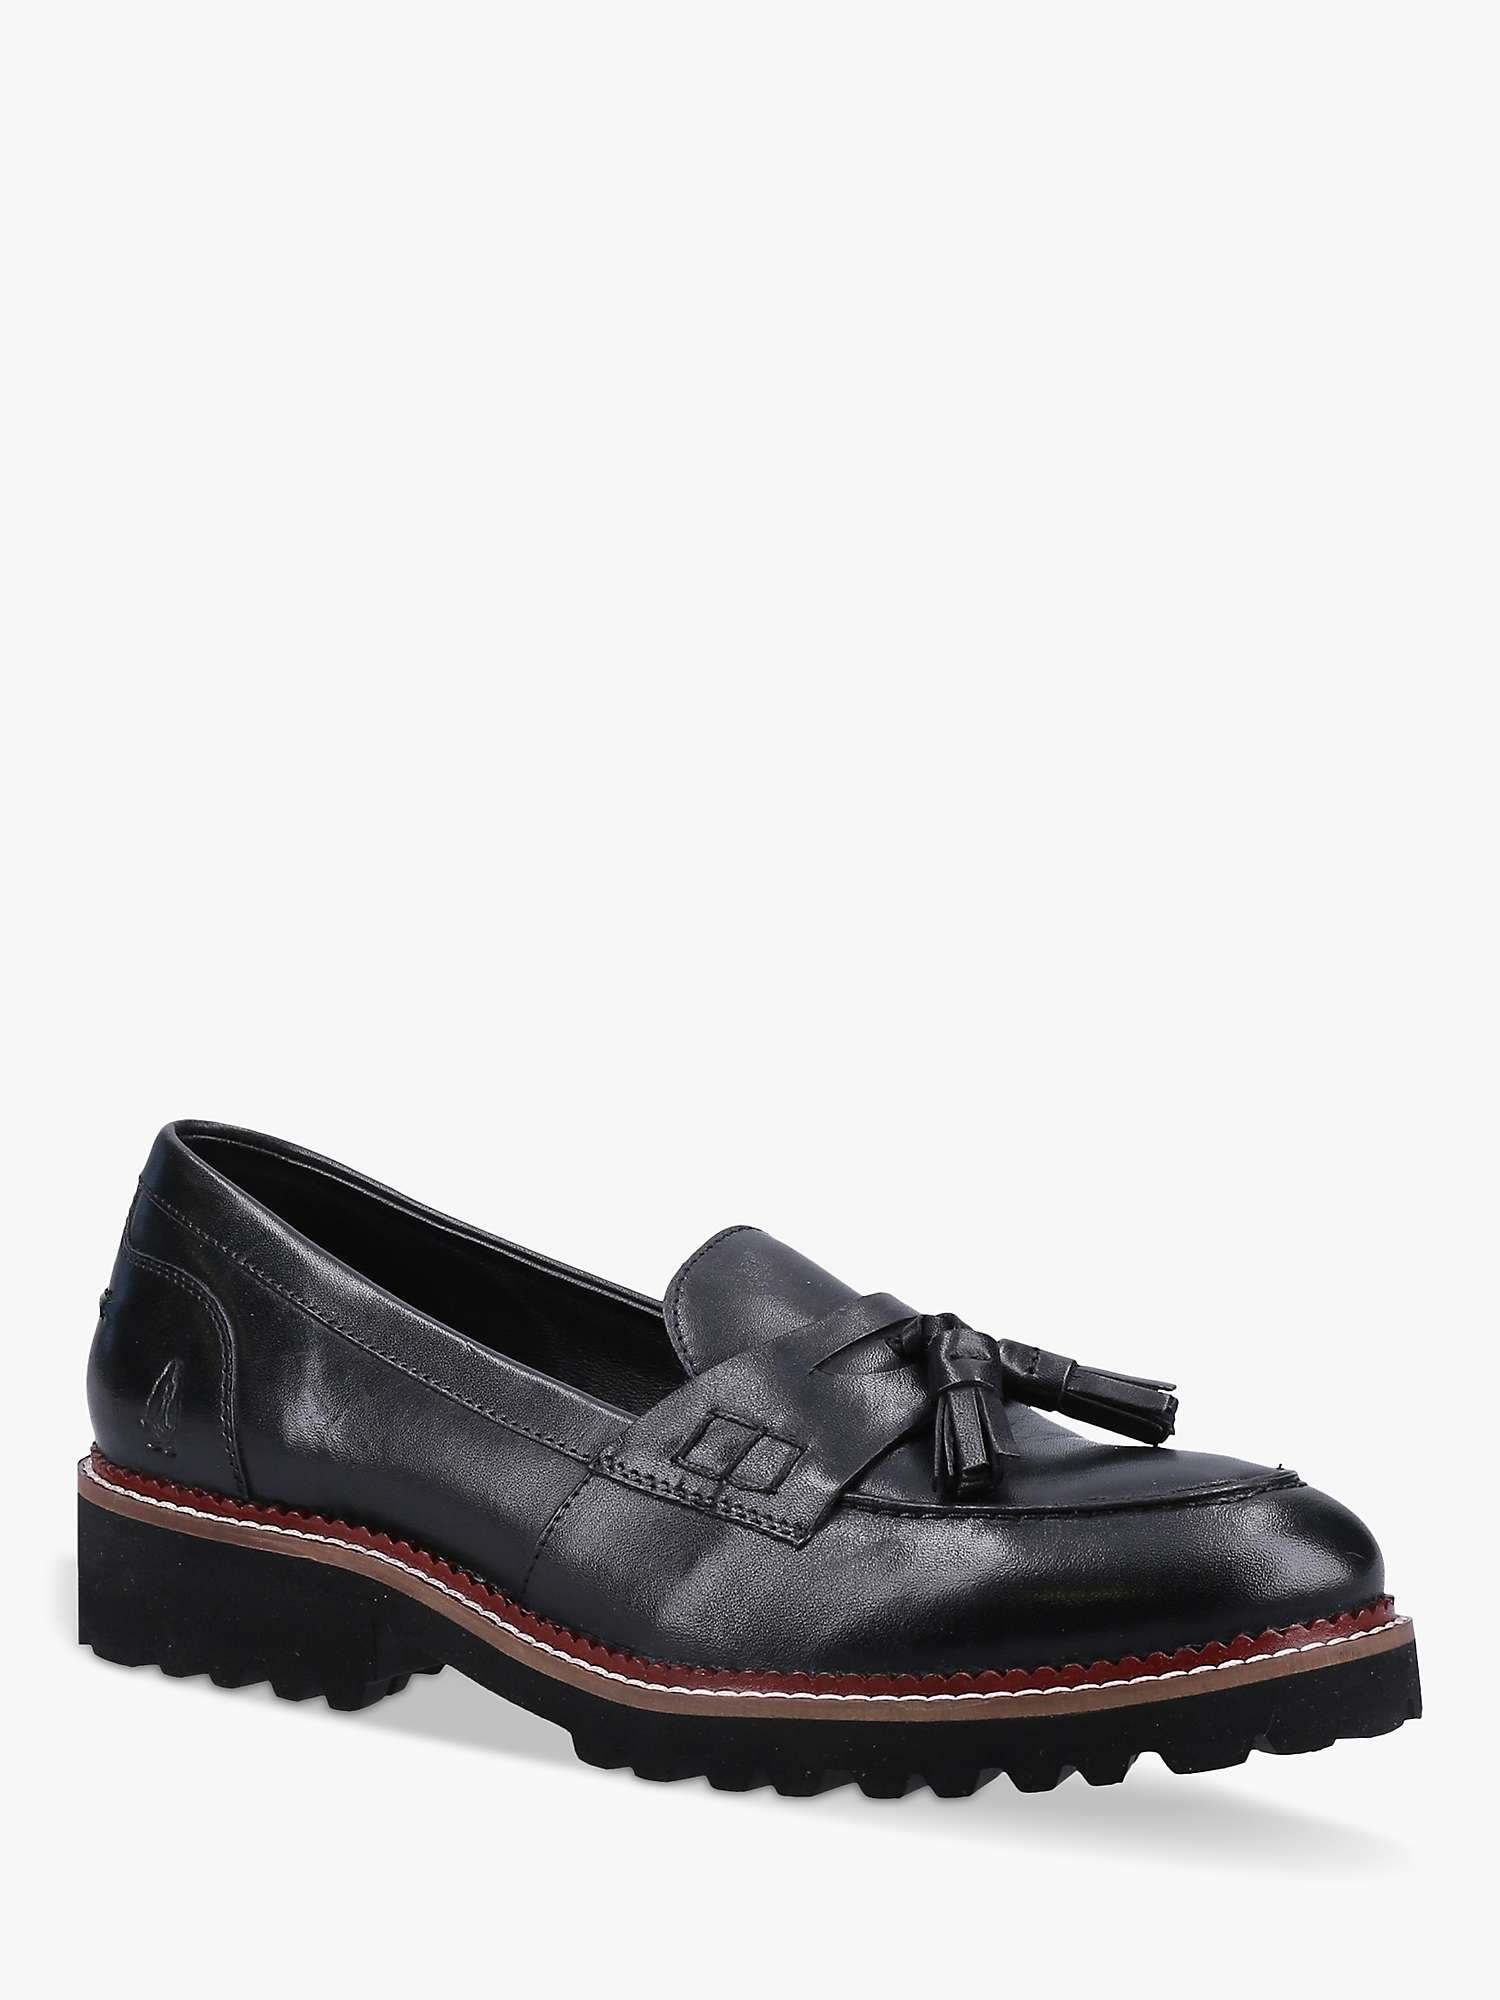 Buy Hush Puppies Ginny Leather Loafers Online at johnlewis.com